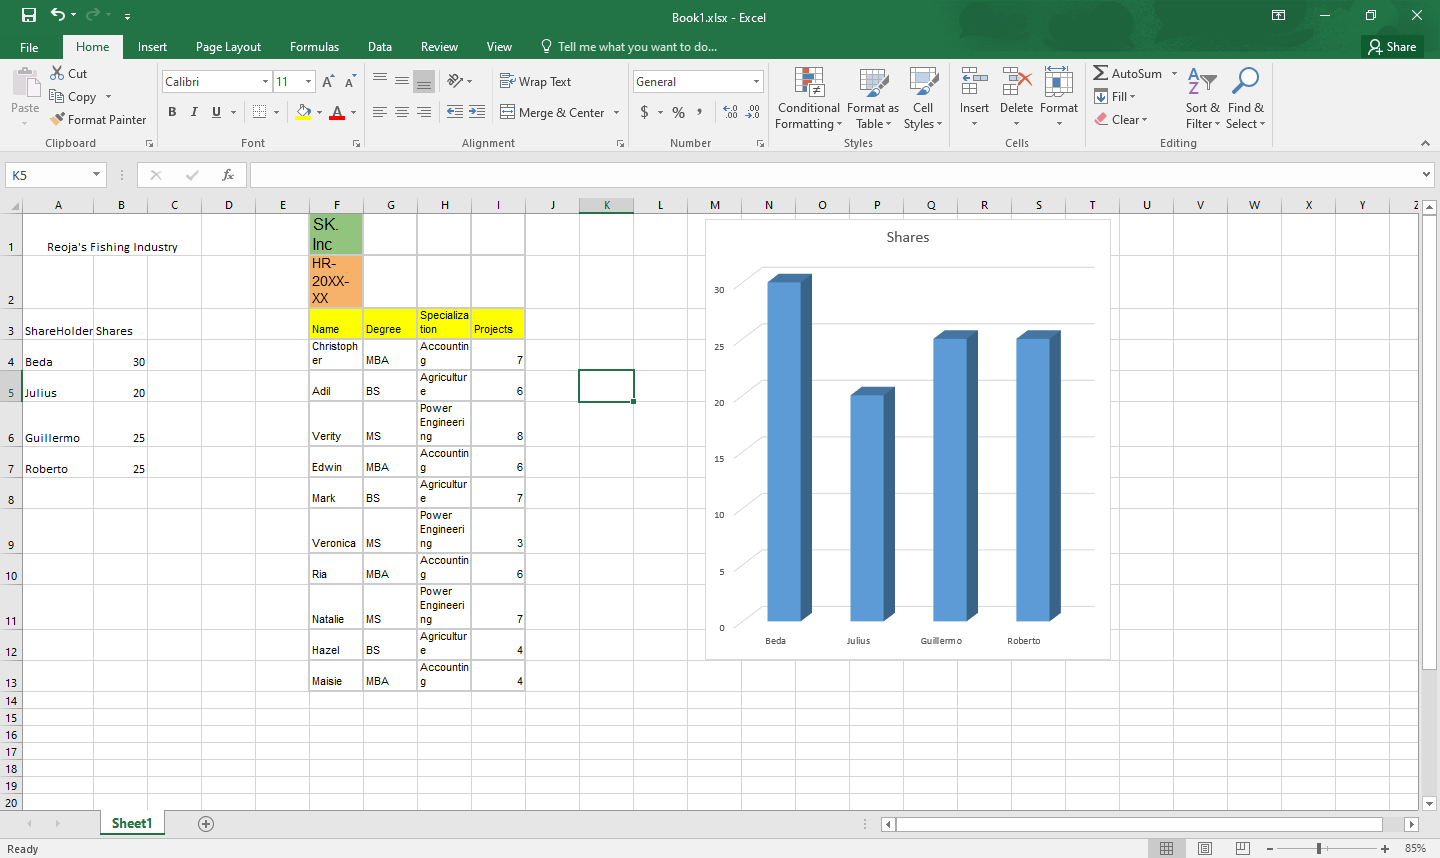 Open an Excel file where you have the table from your PowerPoint data.